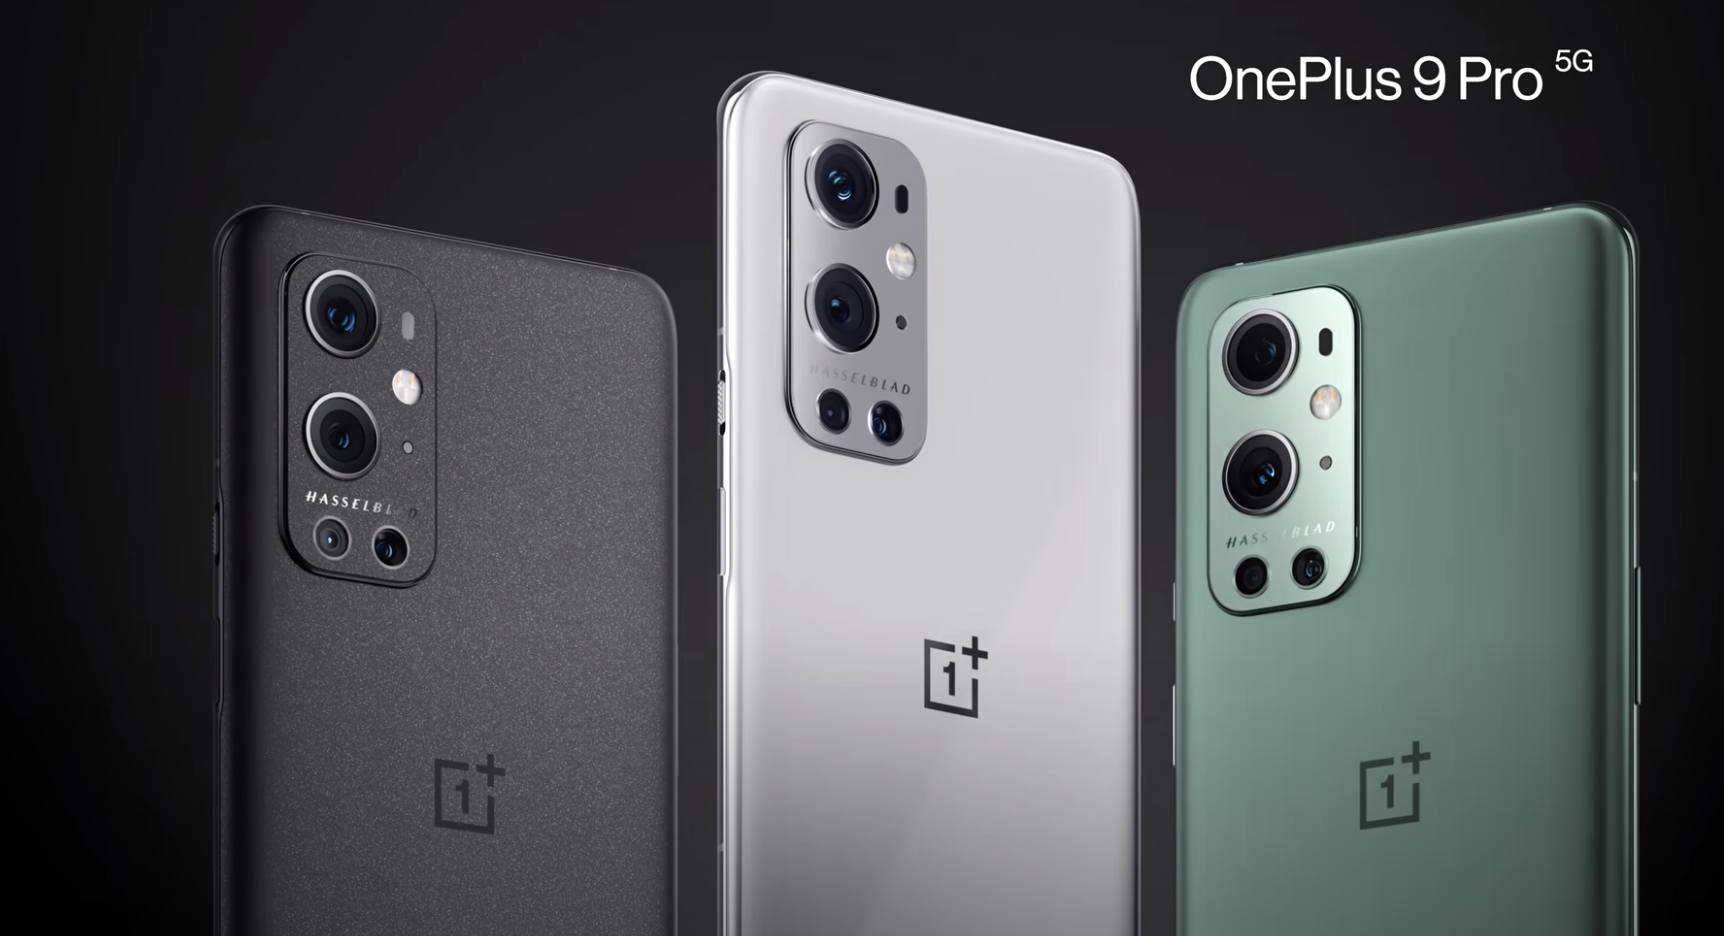 Here's What You Need To Know About The OnePlus 9 & OnePlus 9 Pro 